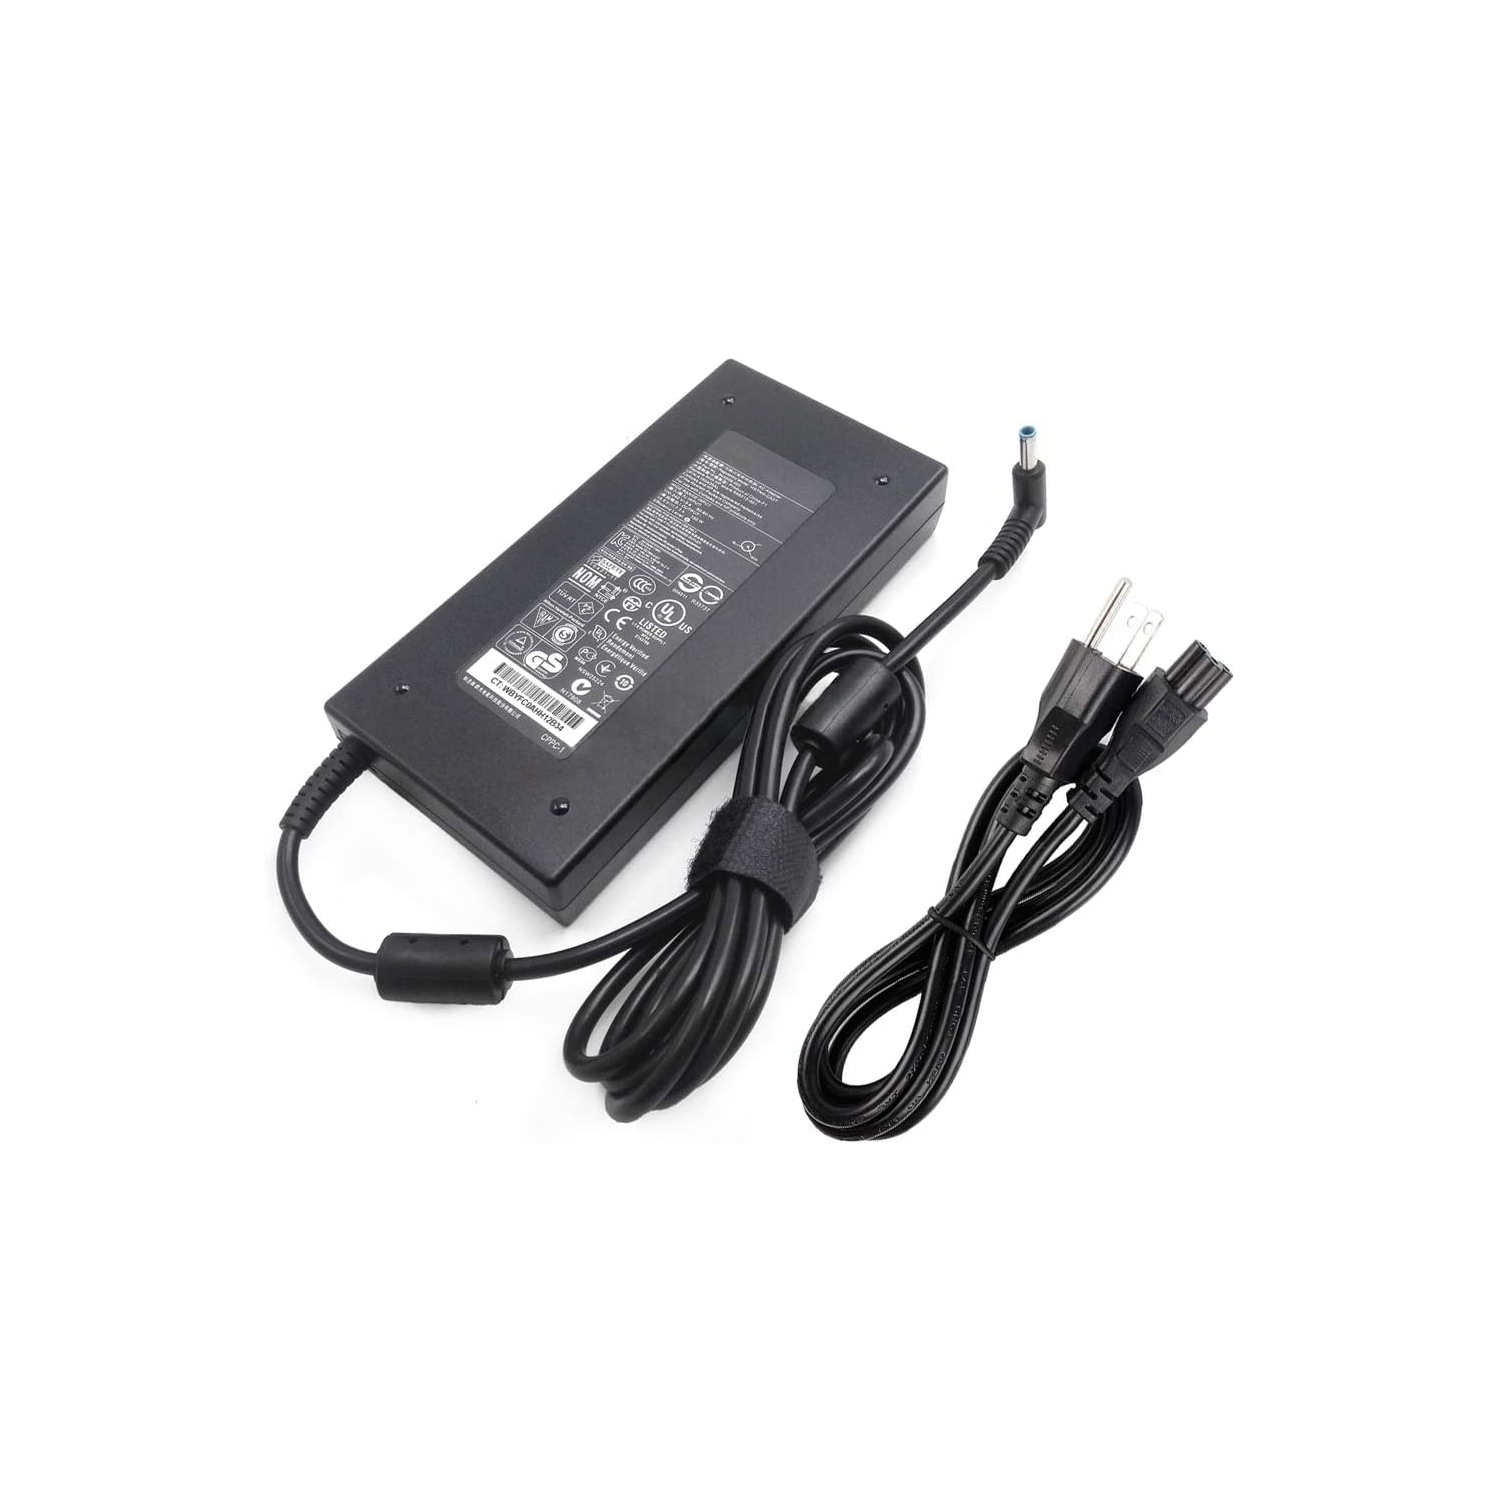 150W 7.7A Charger Power Adapter for HP Zbook Studio 15 G3 G4 G5 G6 HP OMEN 15 17 Pavilion Gaming 15 17 Laptop, 776620-001 917677-003 917677-001 740243-001,Dock G2 5TW13AA HP 120W P